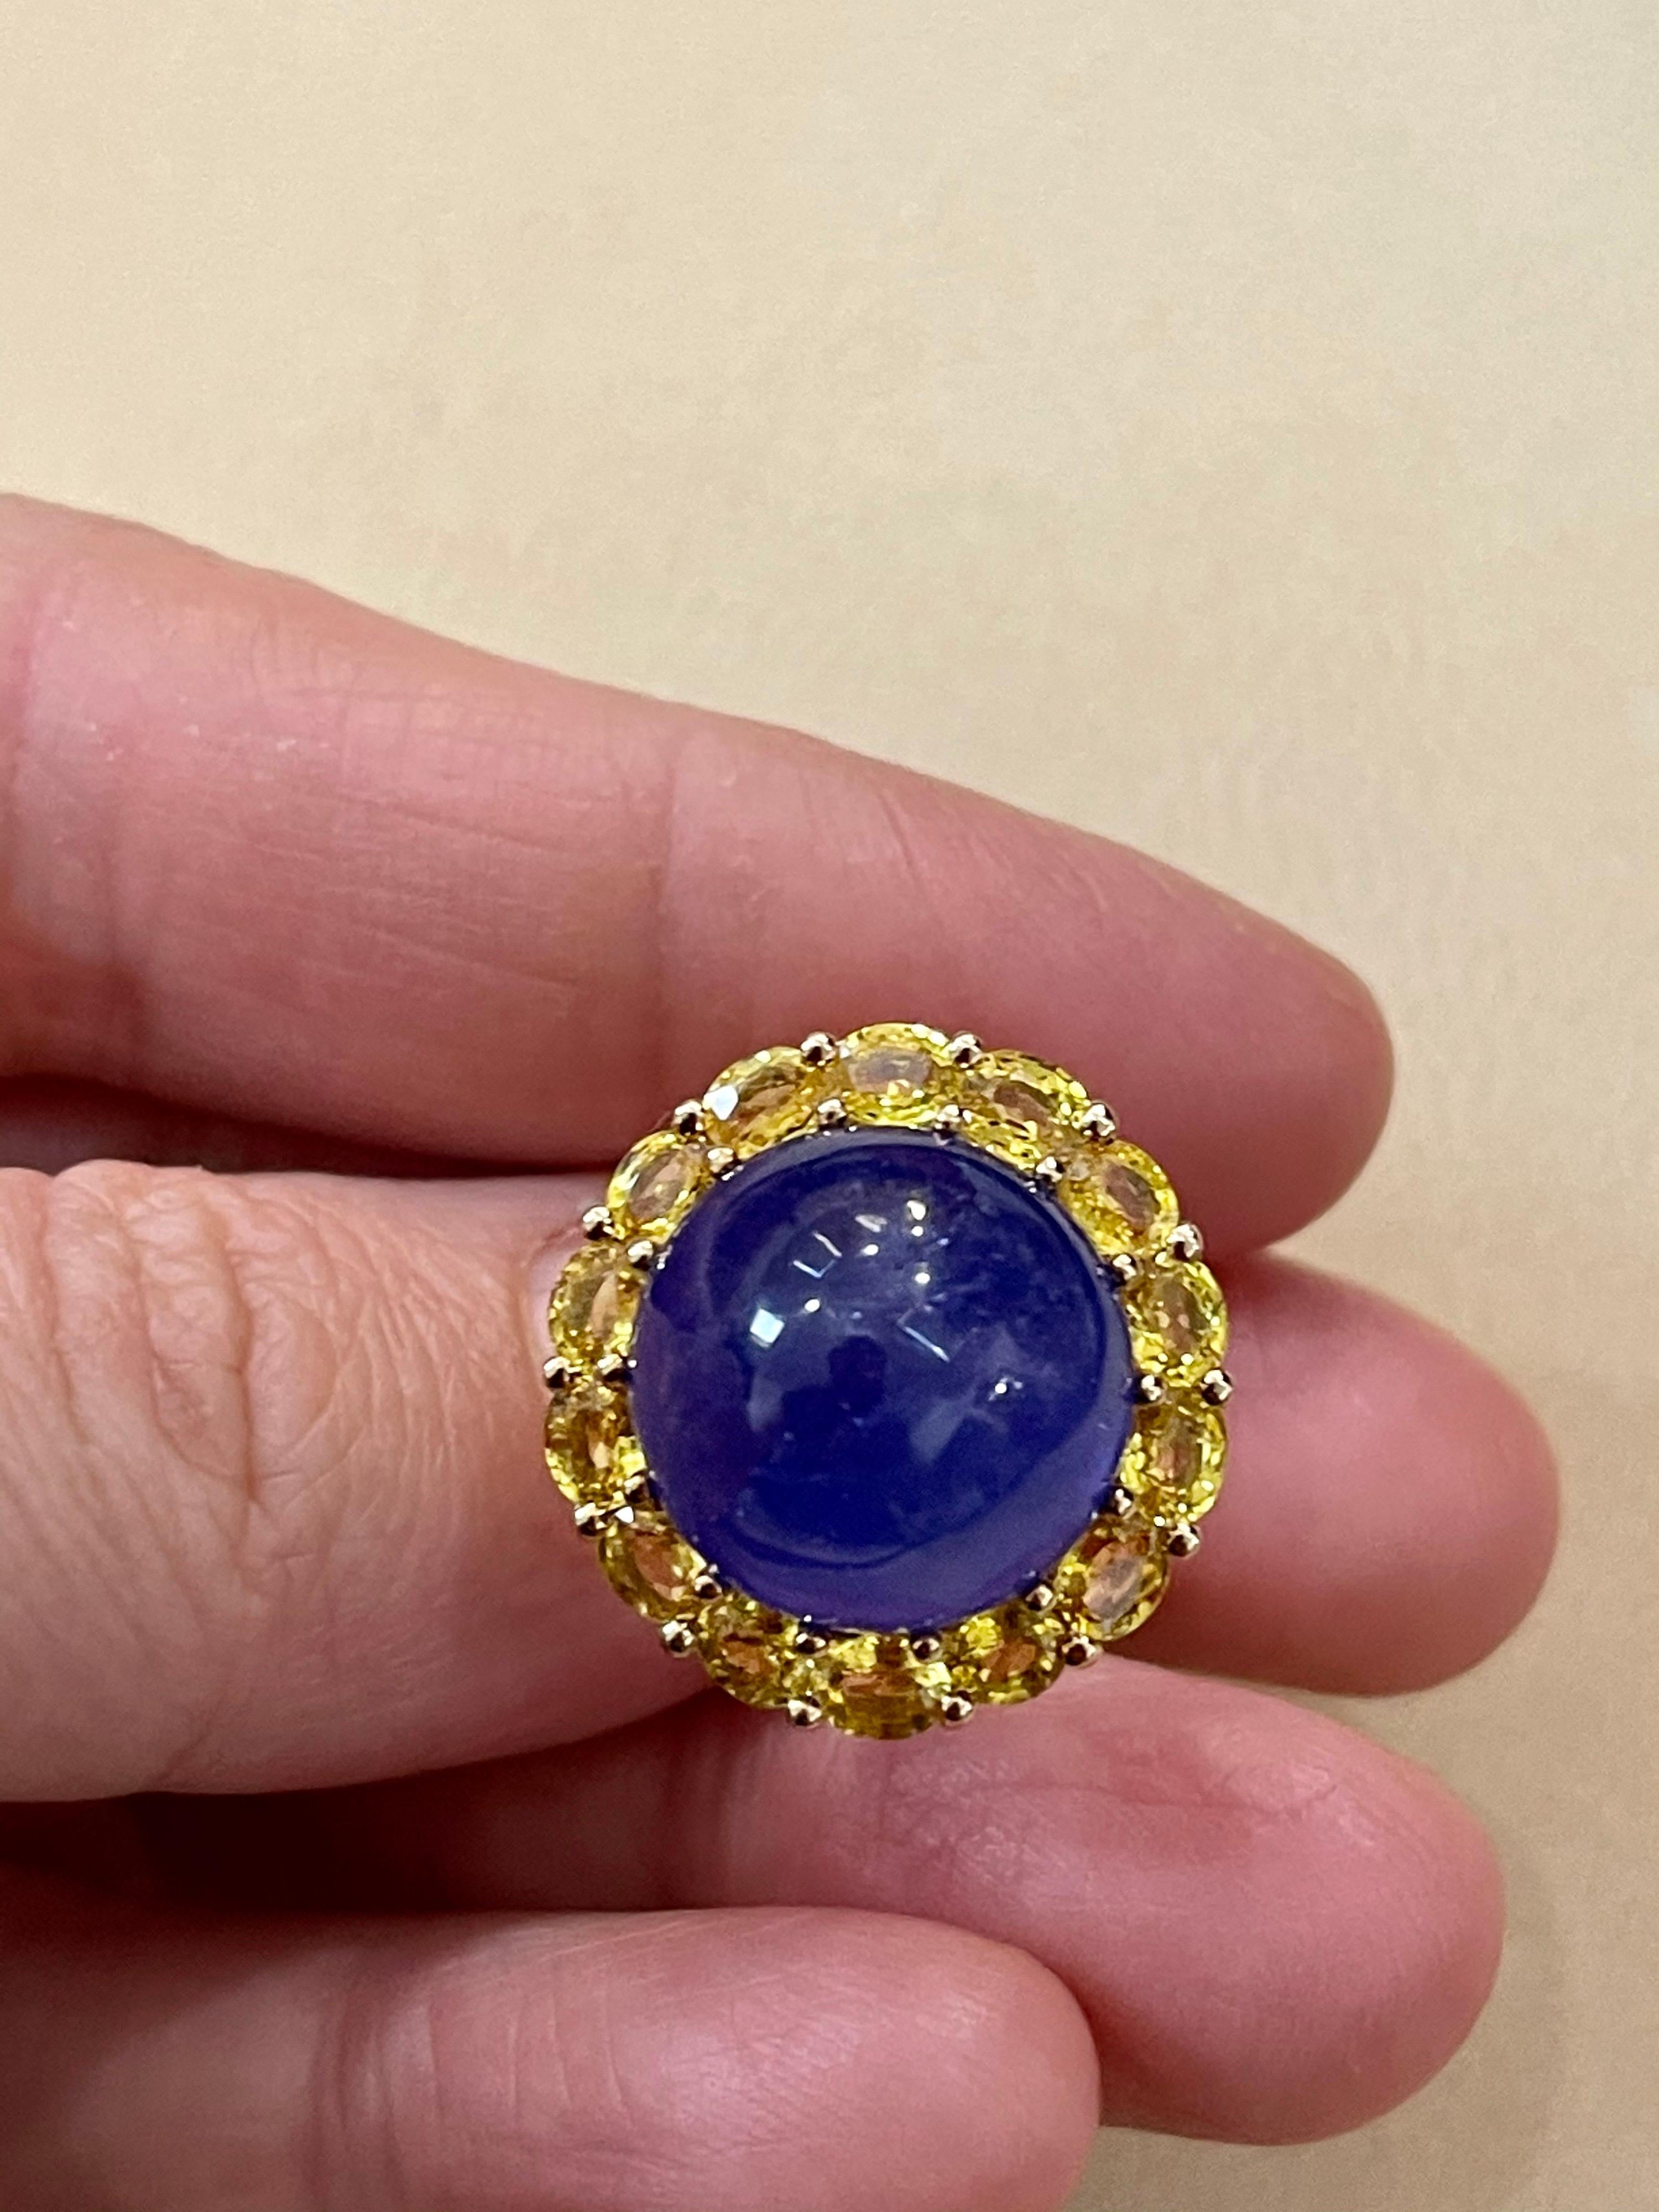 Effy's 15 MMCabochon Tanzanite & Yellow Sapphire  Ring 14 Karat Yellow Gold
14 Karat yellow Gold 10 Grams
Cabochon Tanzanite surrounded by 14 Round Yellow Sapphire each 4X3 MM
Ring Size 7  ( it can be resized to any size for free of charge)

All our